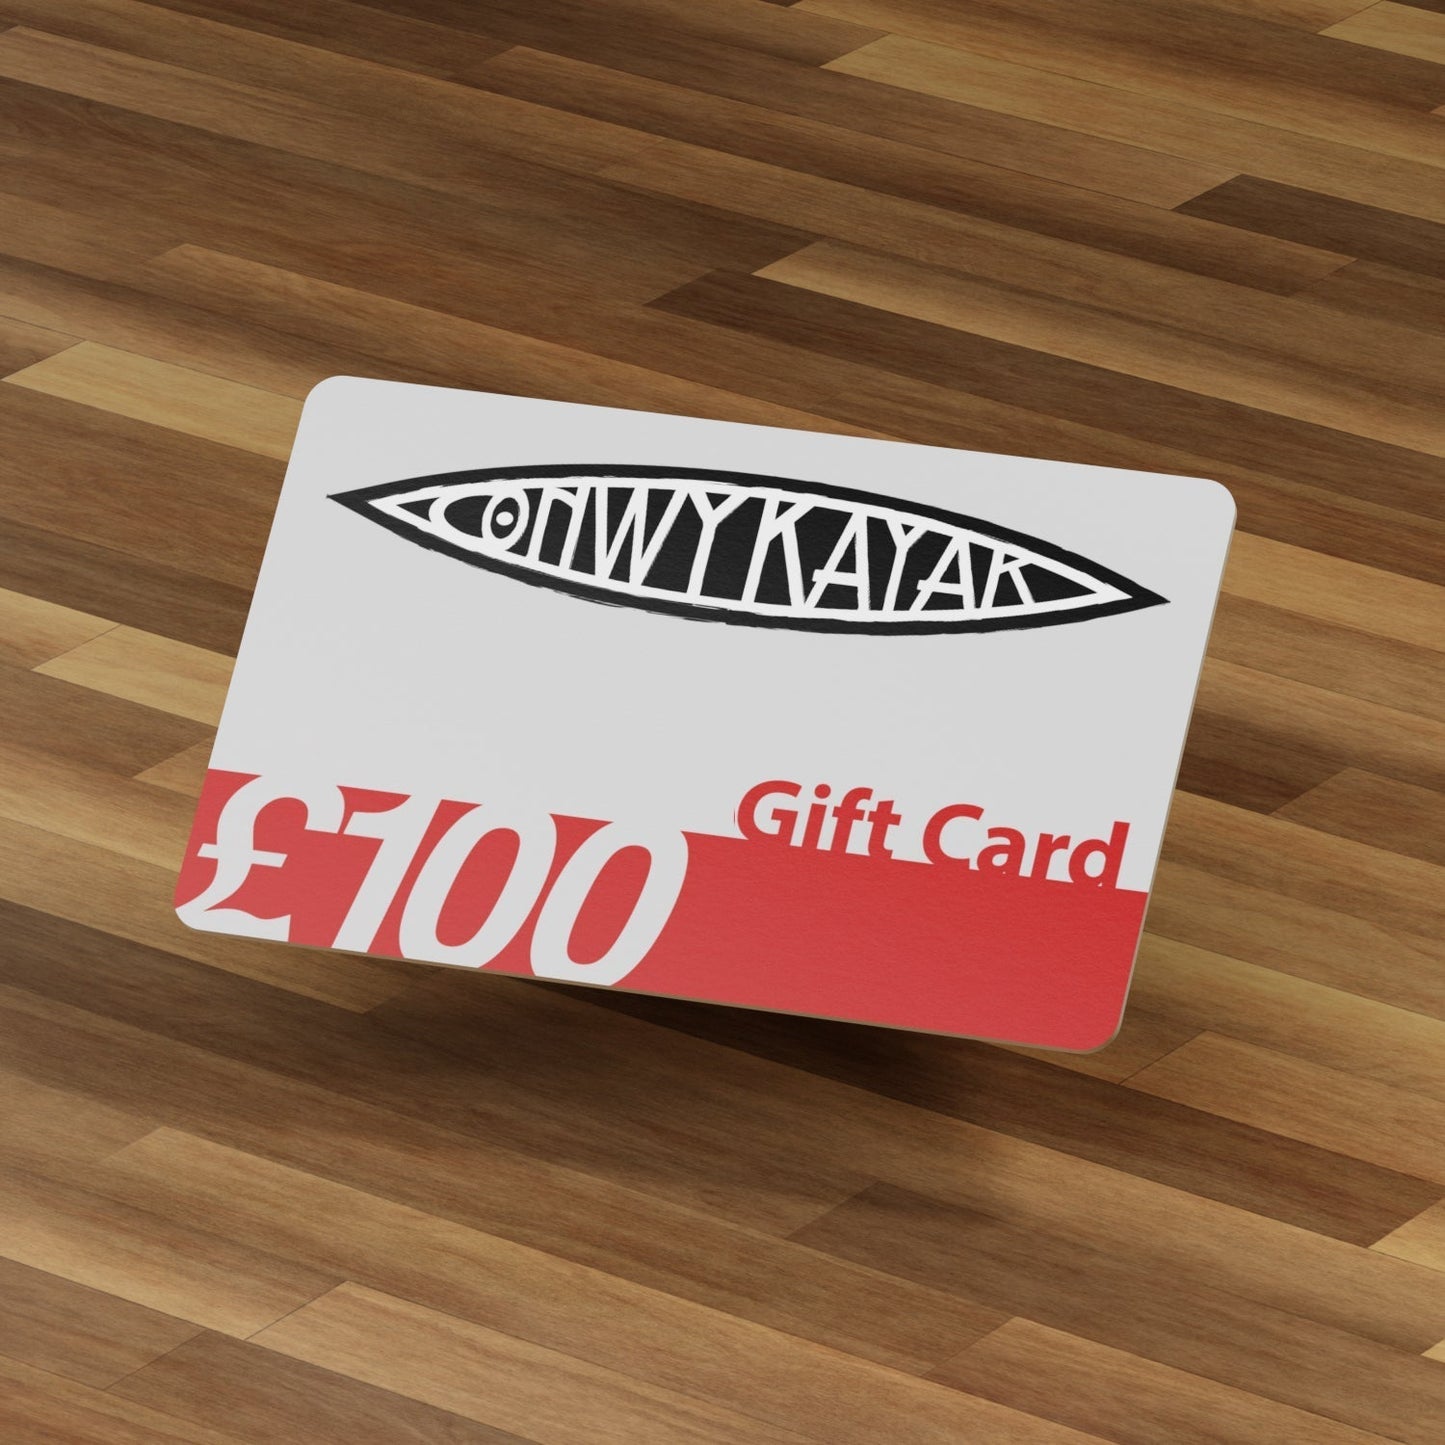 Conwy Kayaks Gift Cards | Conwy Kayaks